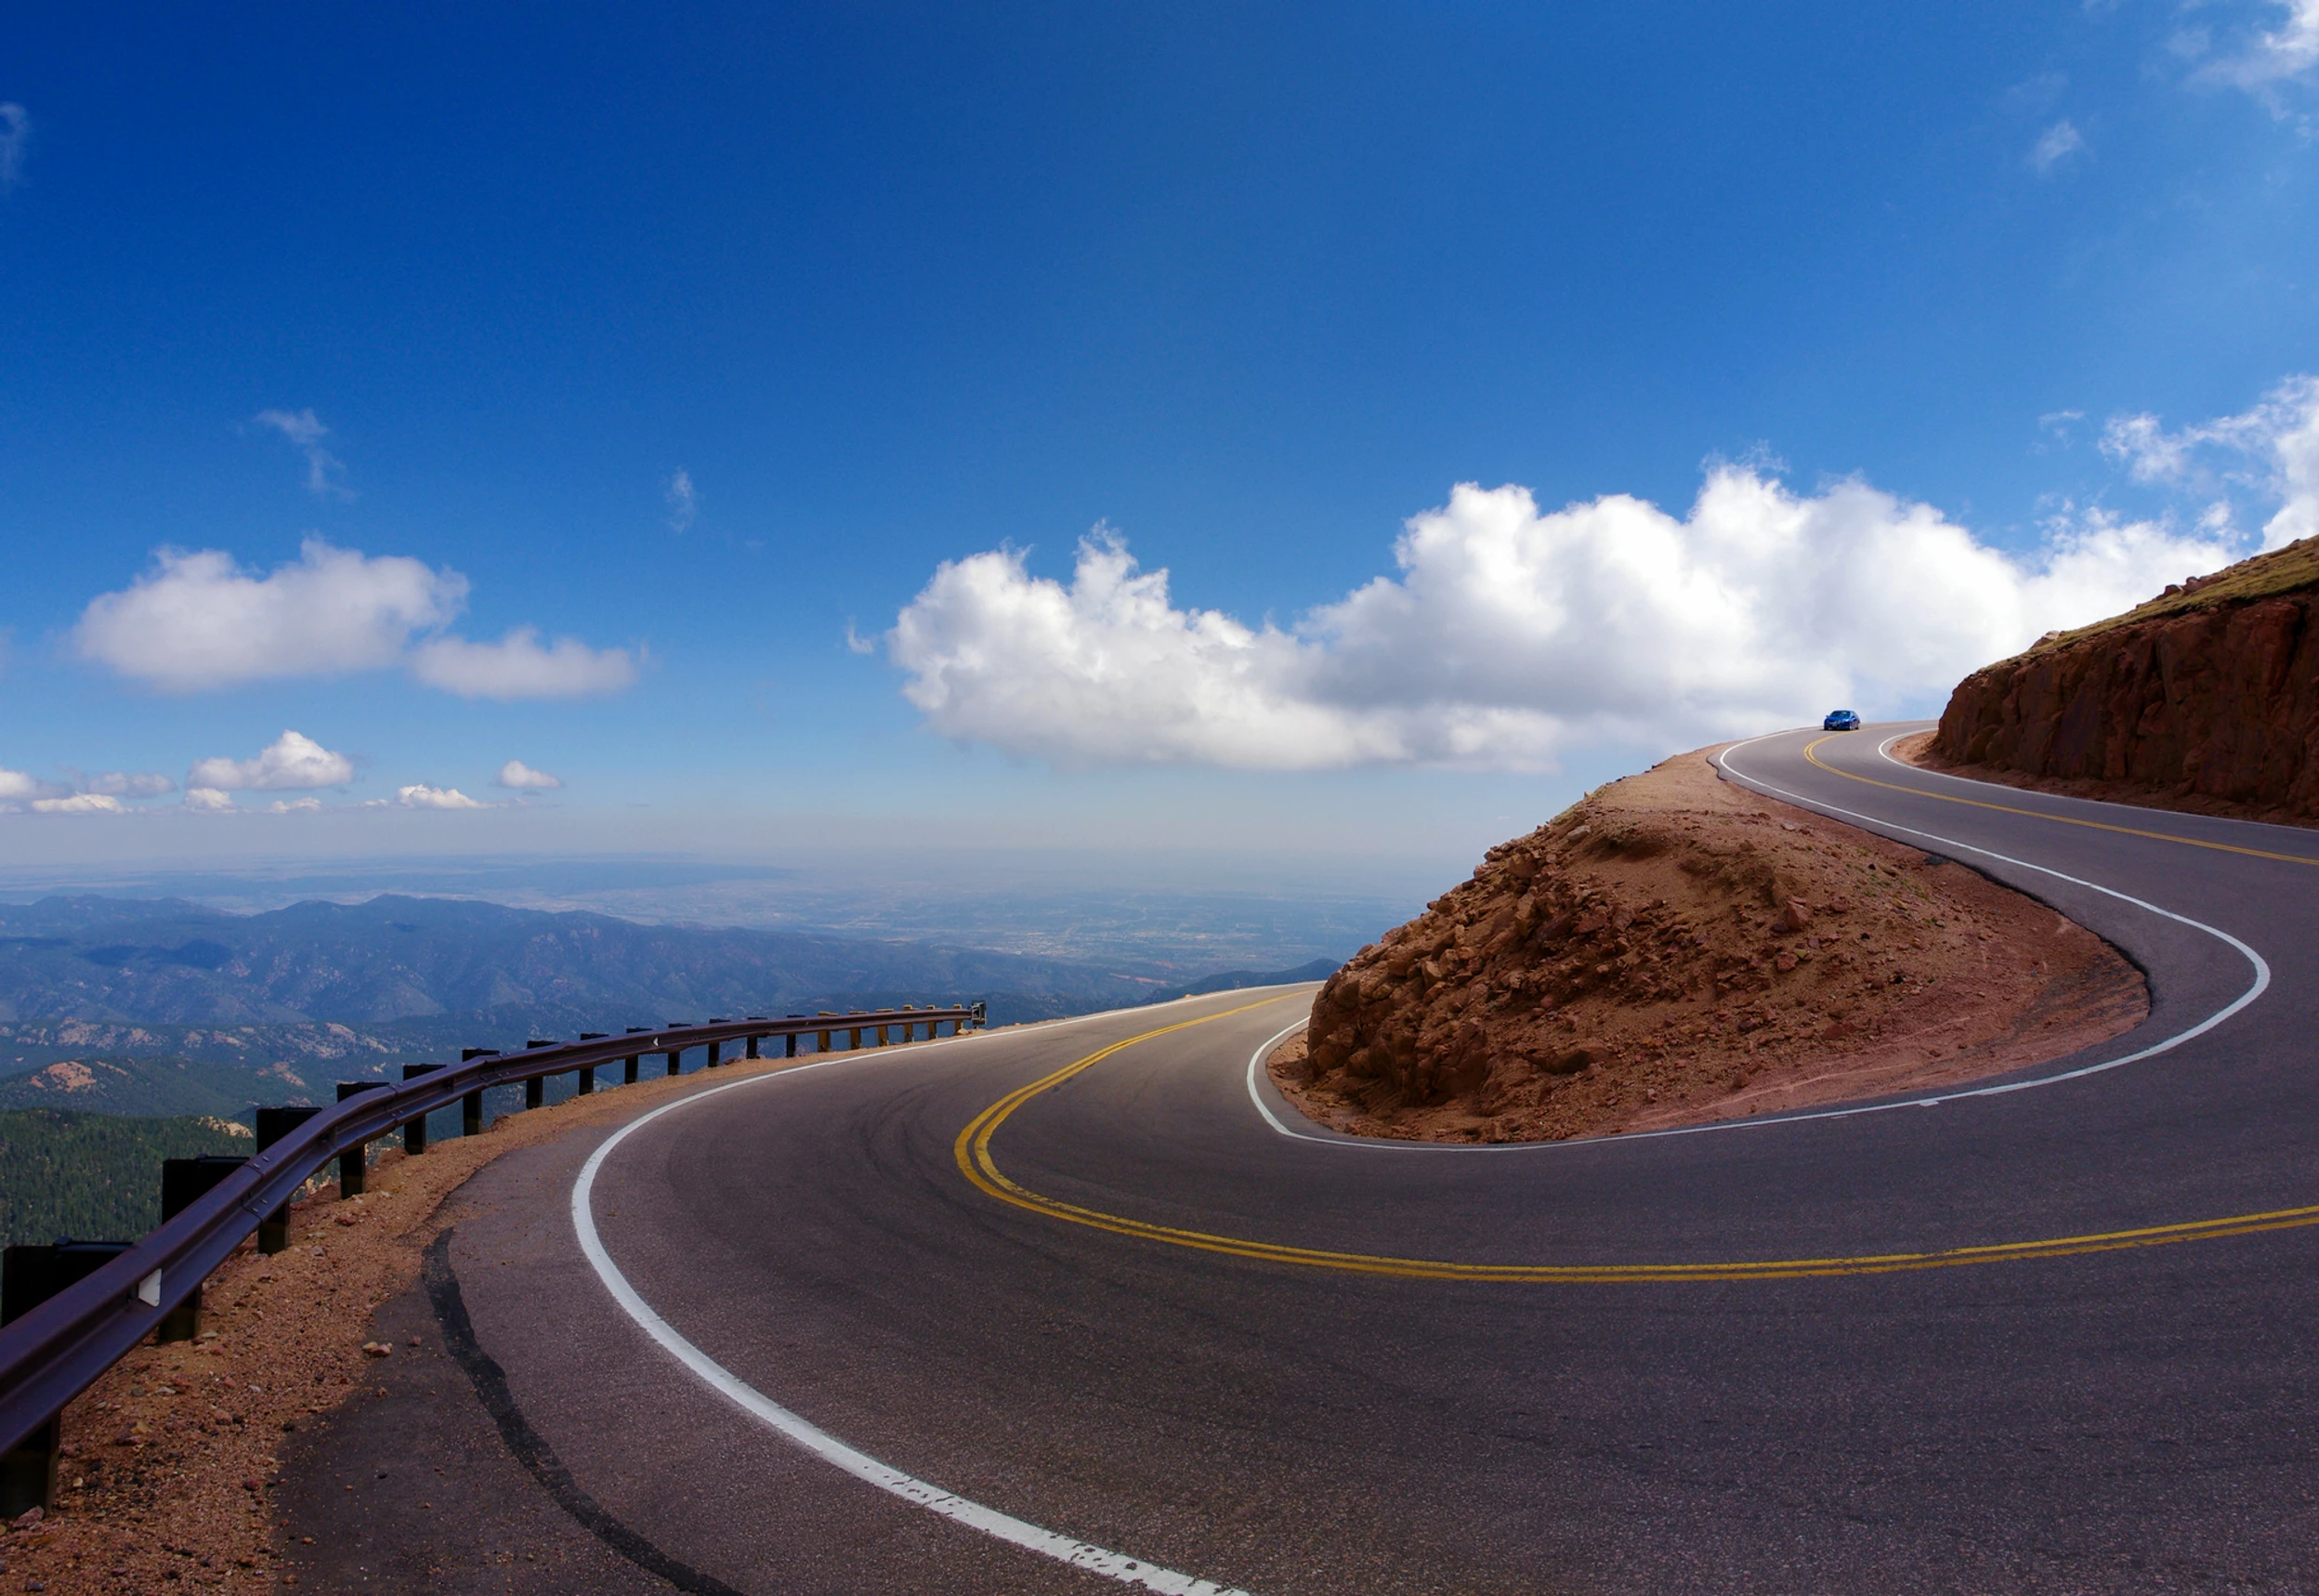 Image of a road bending around a curve with a blue sky and white clouds on a high altitude with views over mountains and hills